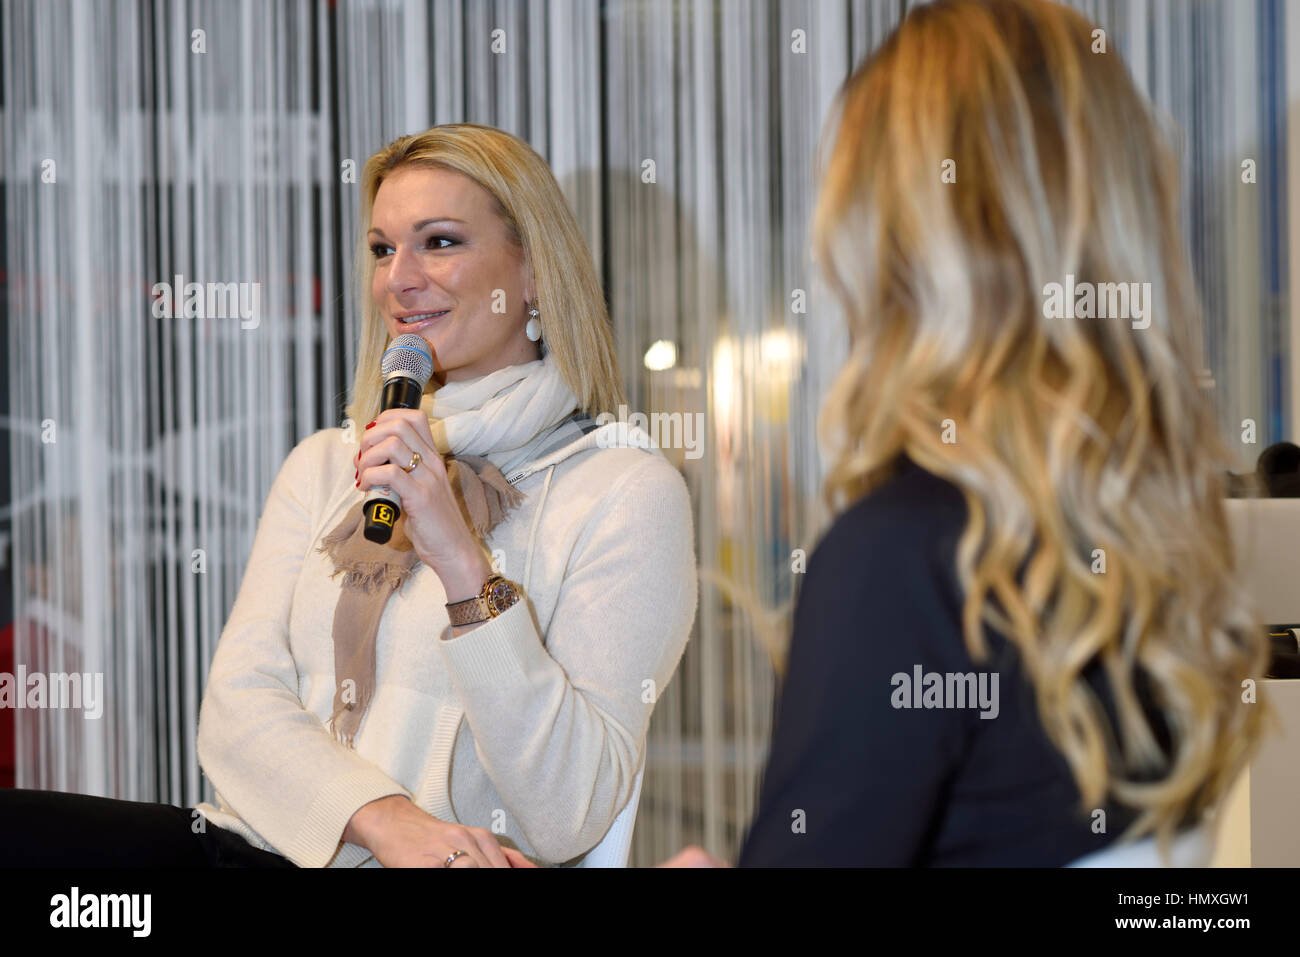 Munich, Germany. 6th February, 2017. Maria Höfl-Riesch (left side), former German alpine ski racer and Olympic gold medalist, presents her new fitness book 'Maria macht dich fit/Maria makes you fit' at the ISPO winter sports tradefair in Munich, Germany. Stock Photo